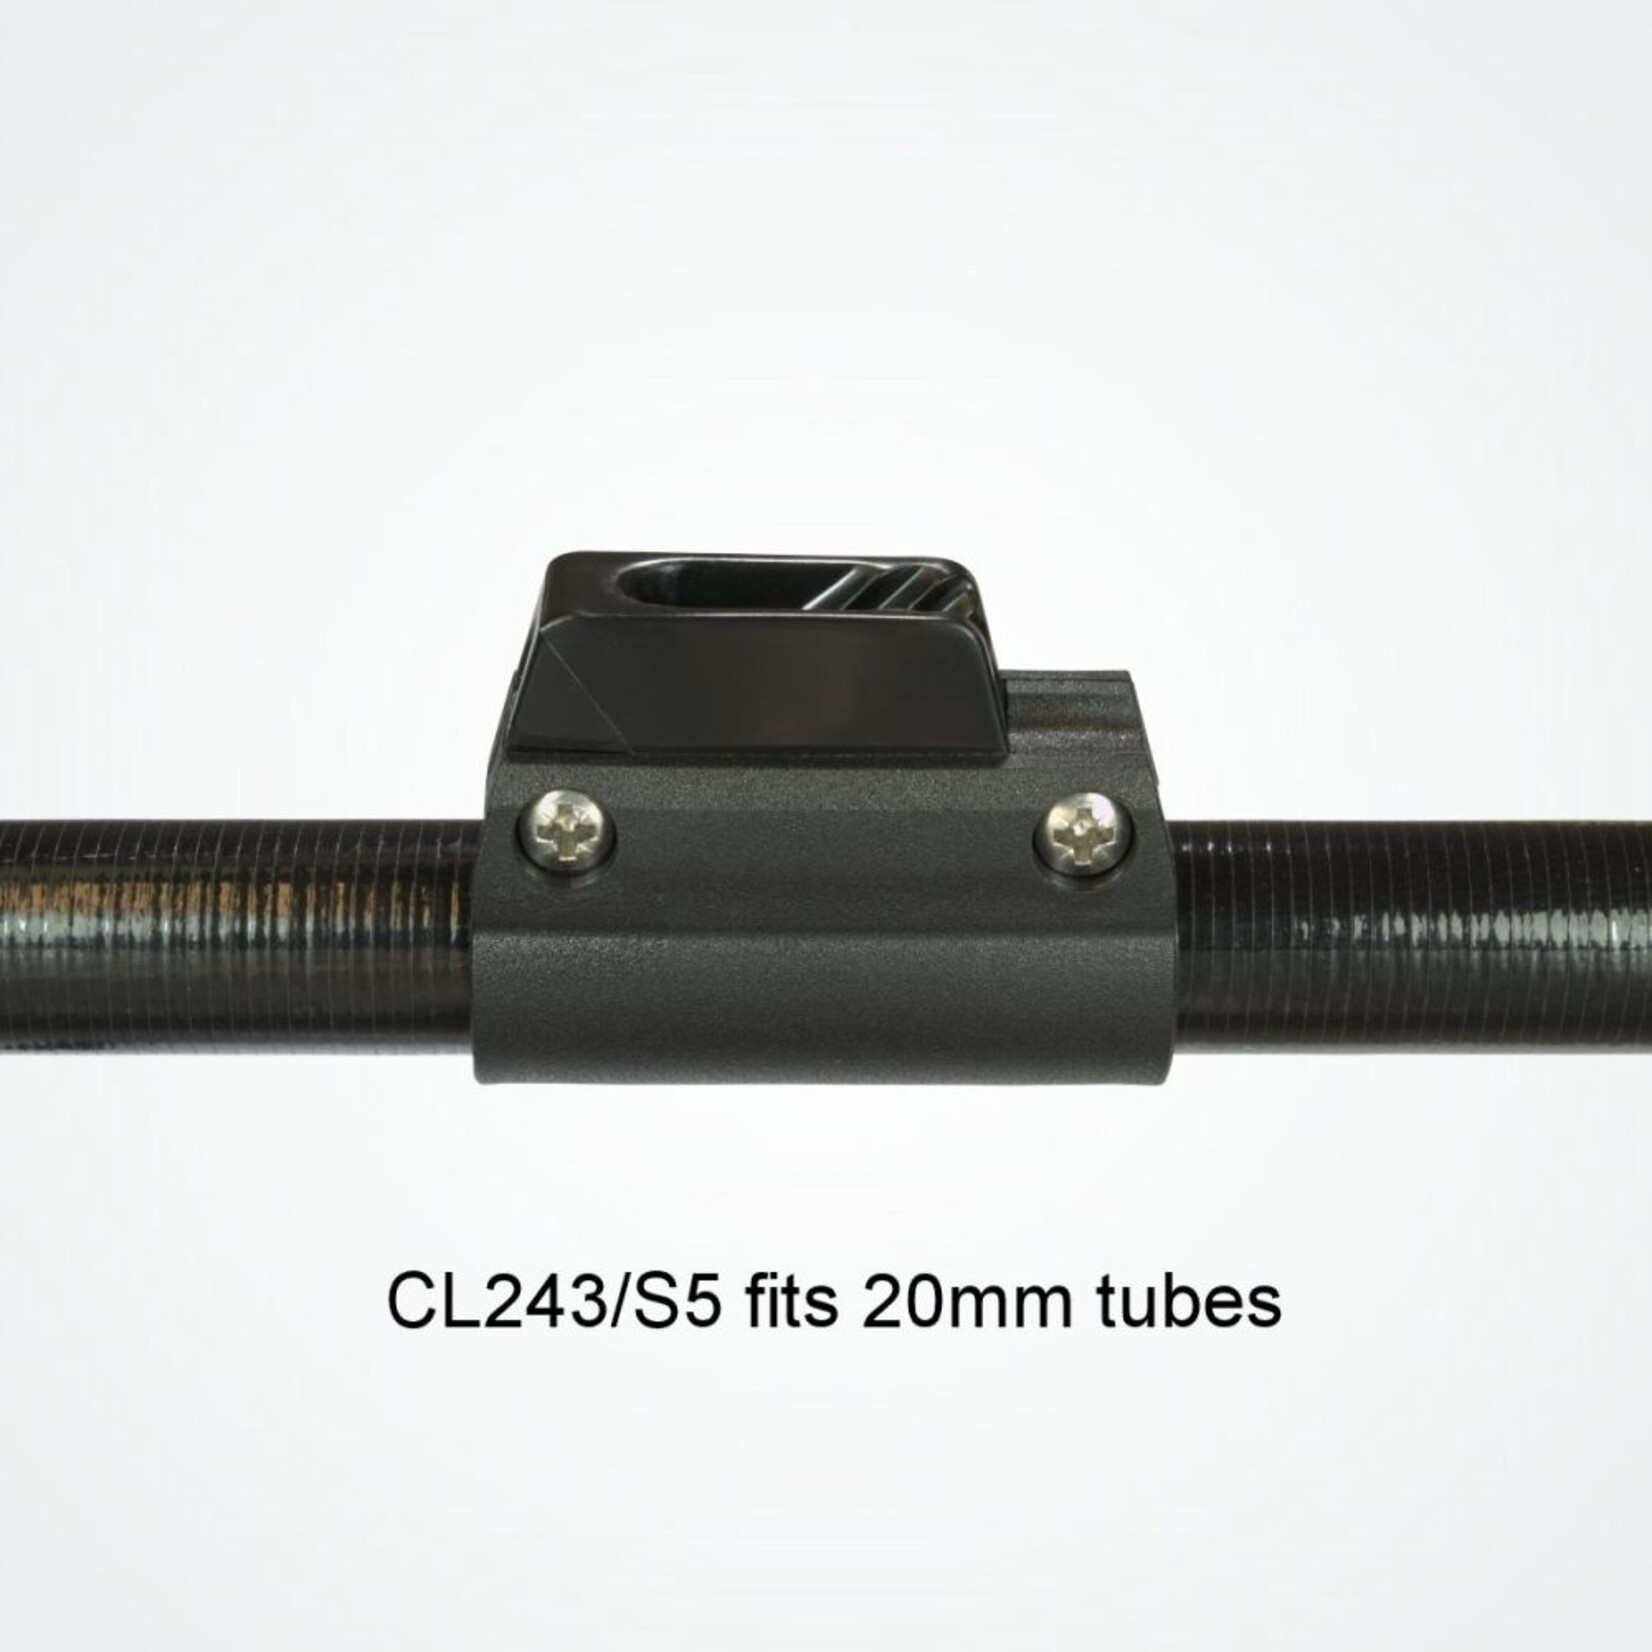 Clamcleat Nylon CL243. 1 x CL072 Strap to suit 20mm dia Pole. 2 x Screws. 1 x Rubber Packing Piece